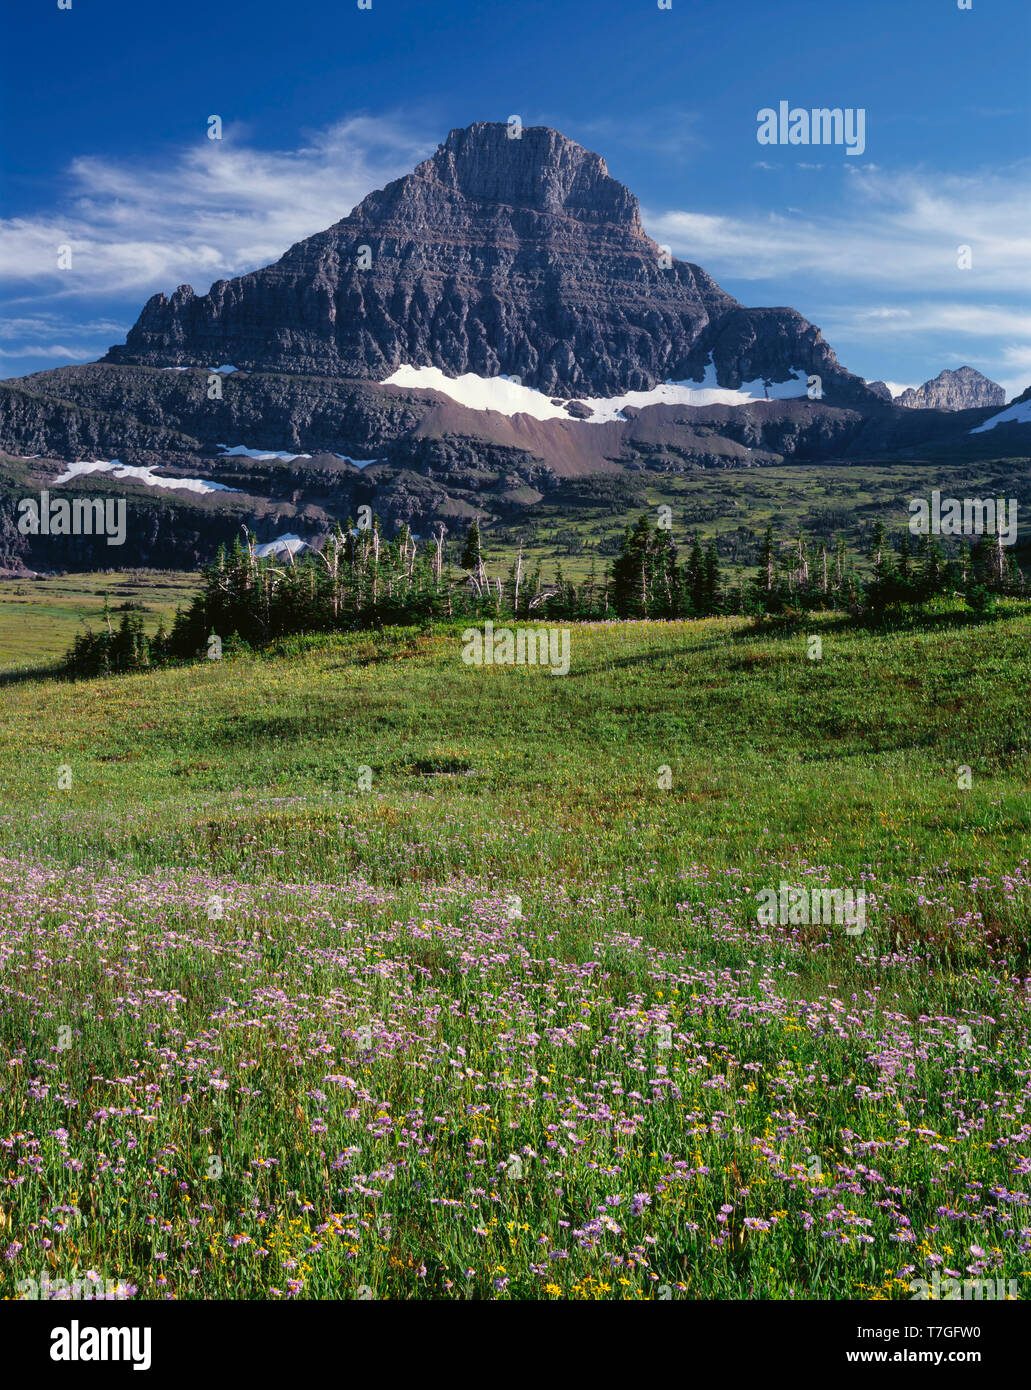 USA, Montana, Glacier National Park, Reynolds Mountain rises beyond wind-stunted conifers and meadow of showy fleabane and arnica near Logan Pass. Stock Photo